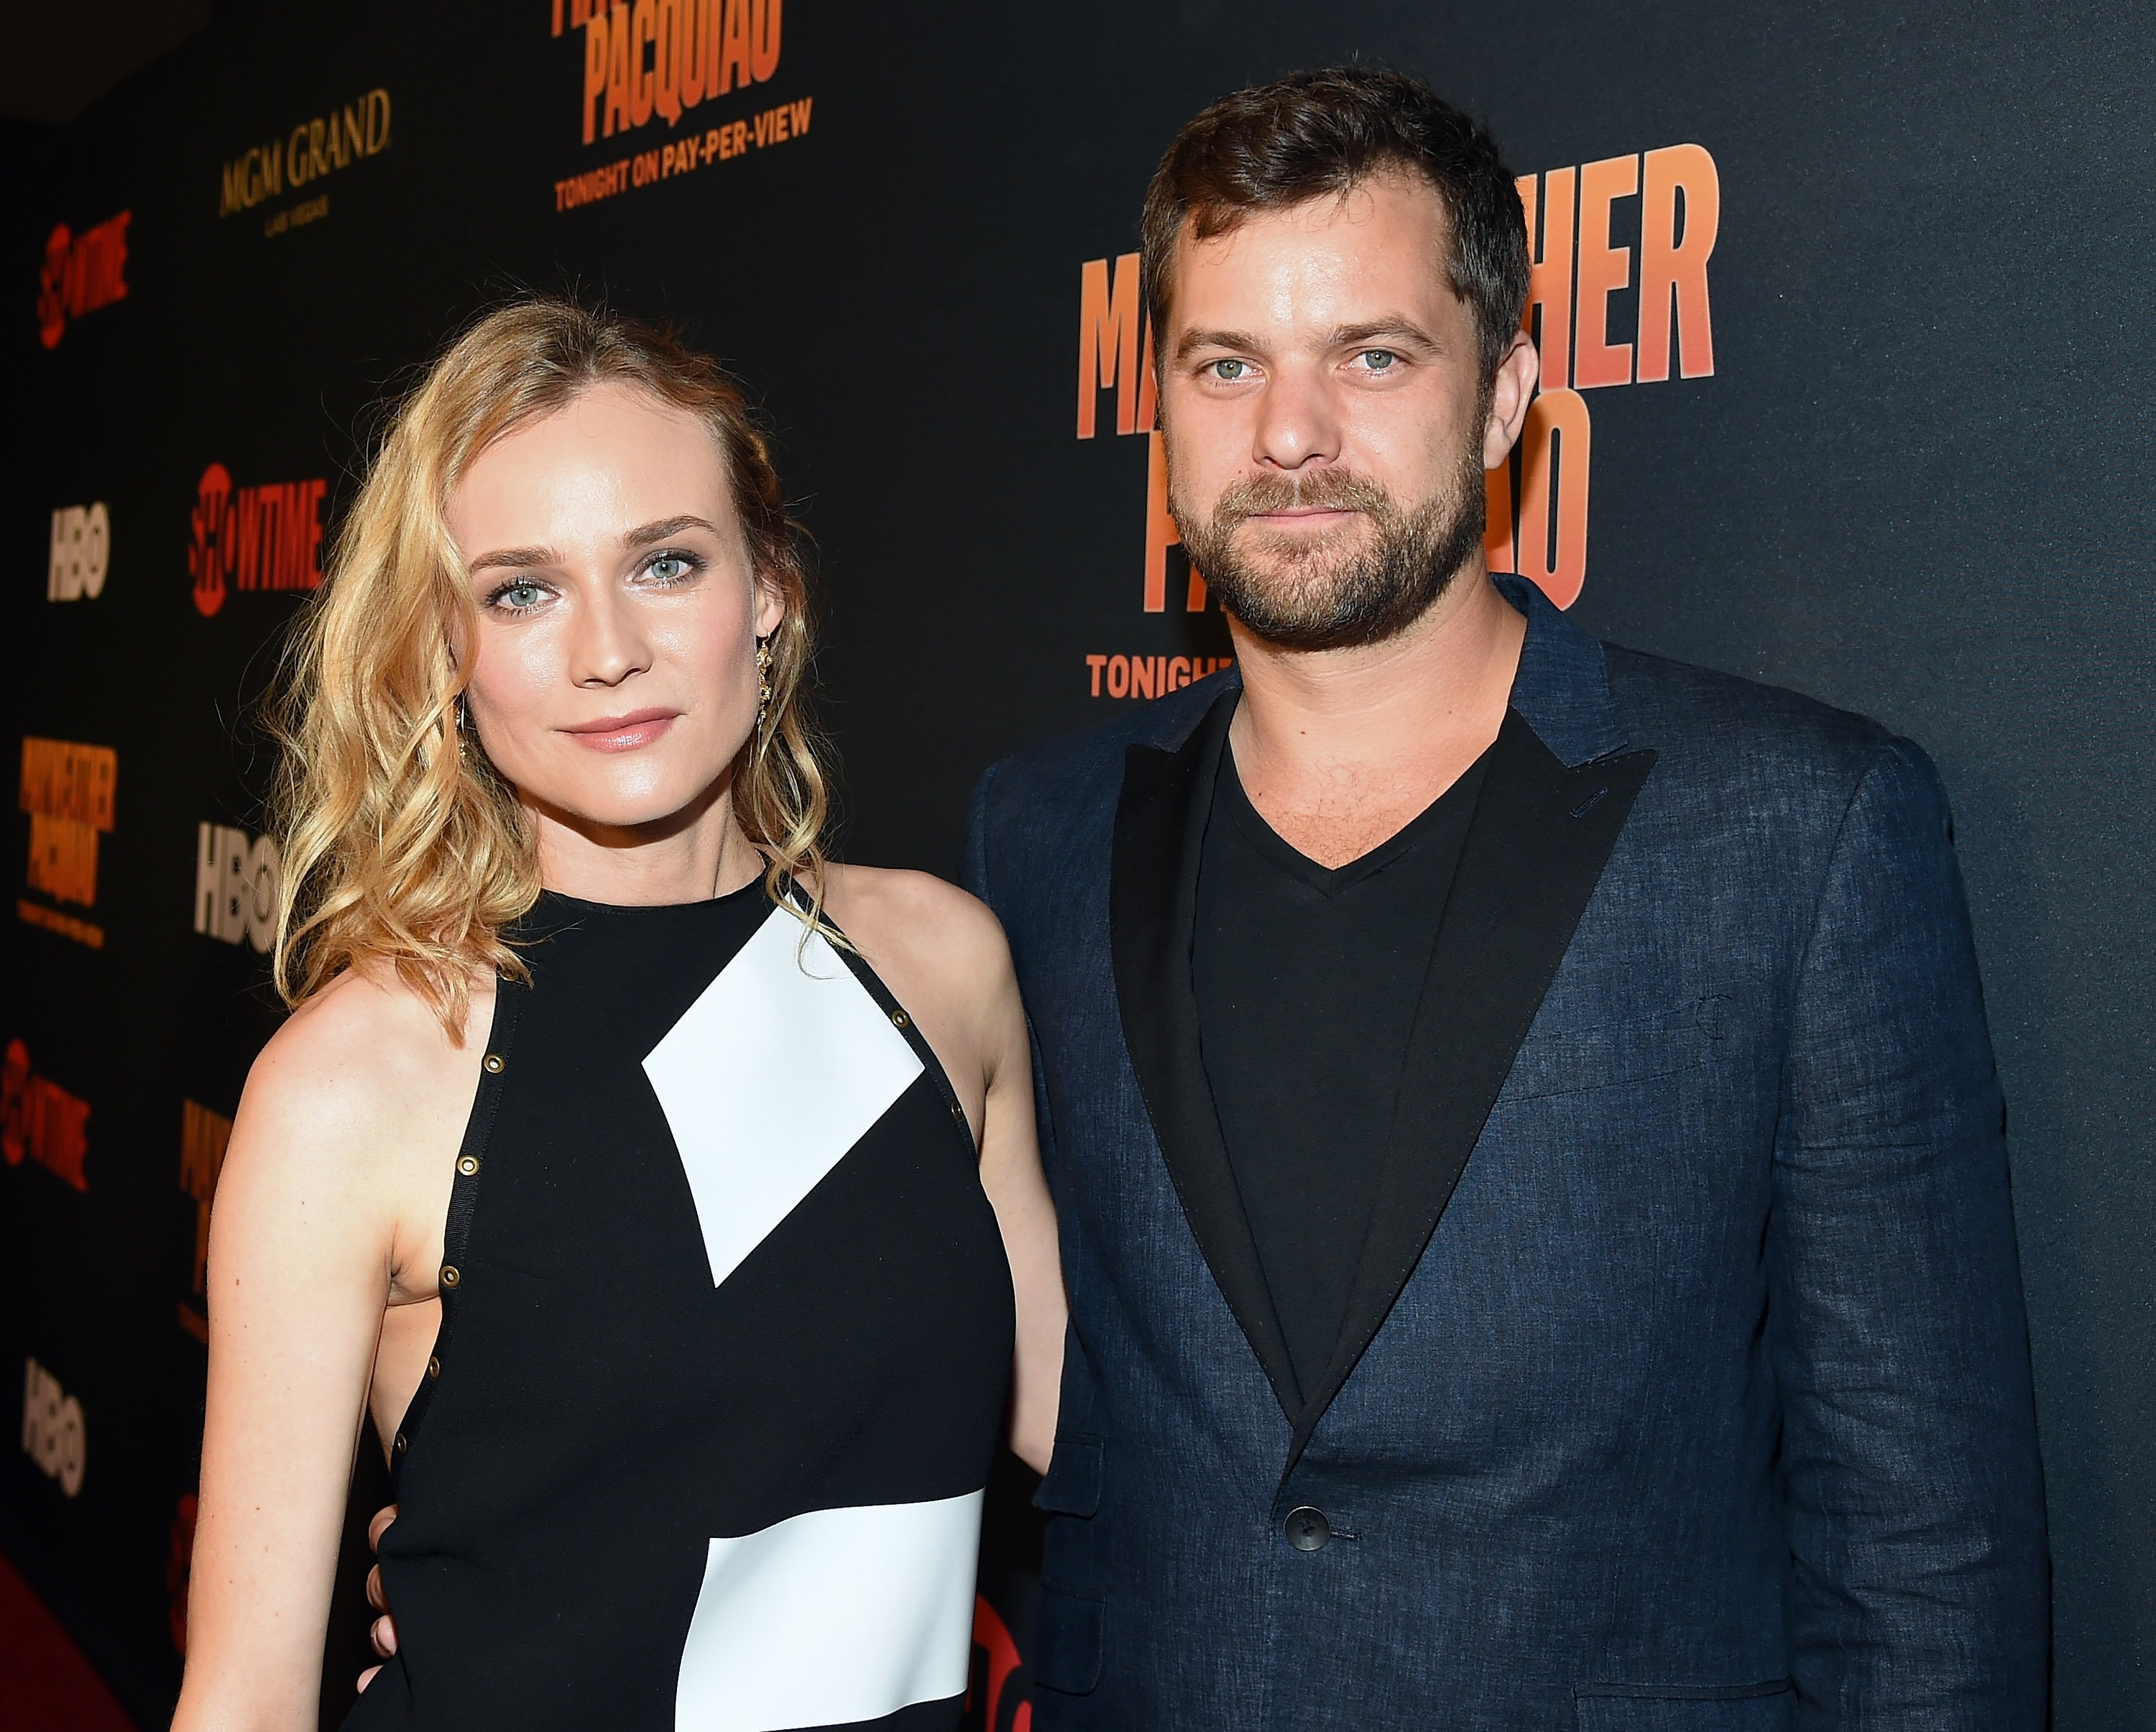 Joshua Jackson and Diane Kruger at the SHOWTIME And HBO VIP Pre-Fight Party for 'Mayweather VS Pacquiao' at MGM Grand Hotel & Casino in Las Vegas, Nevada | Photo: Ethan Miller/Getty Images for SHOWTIME